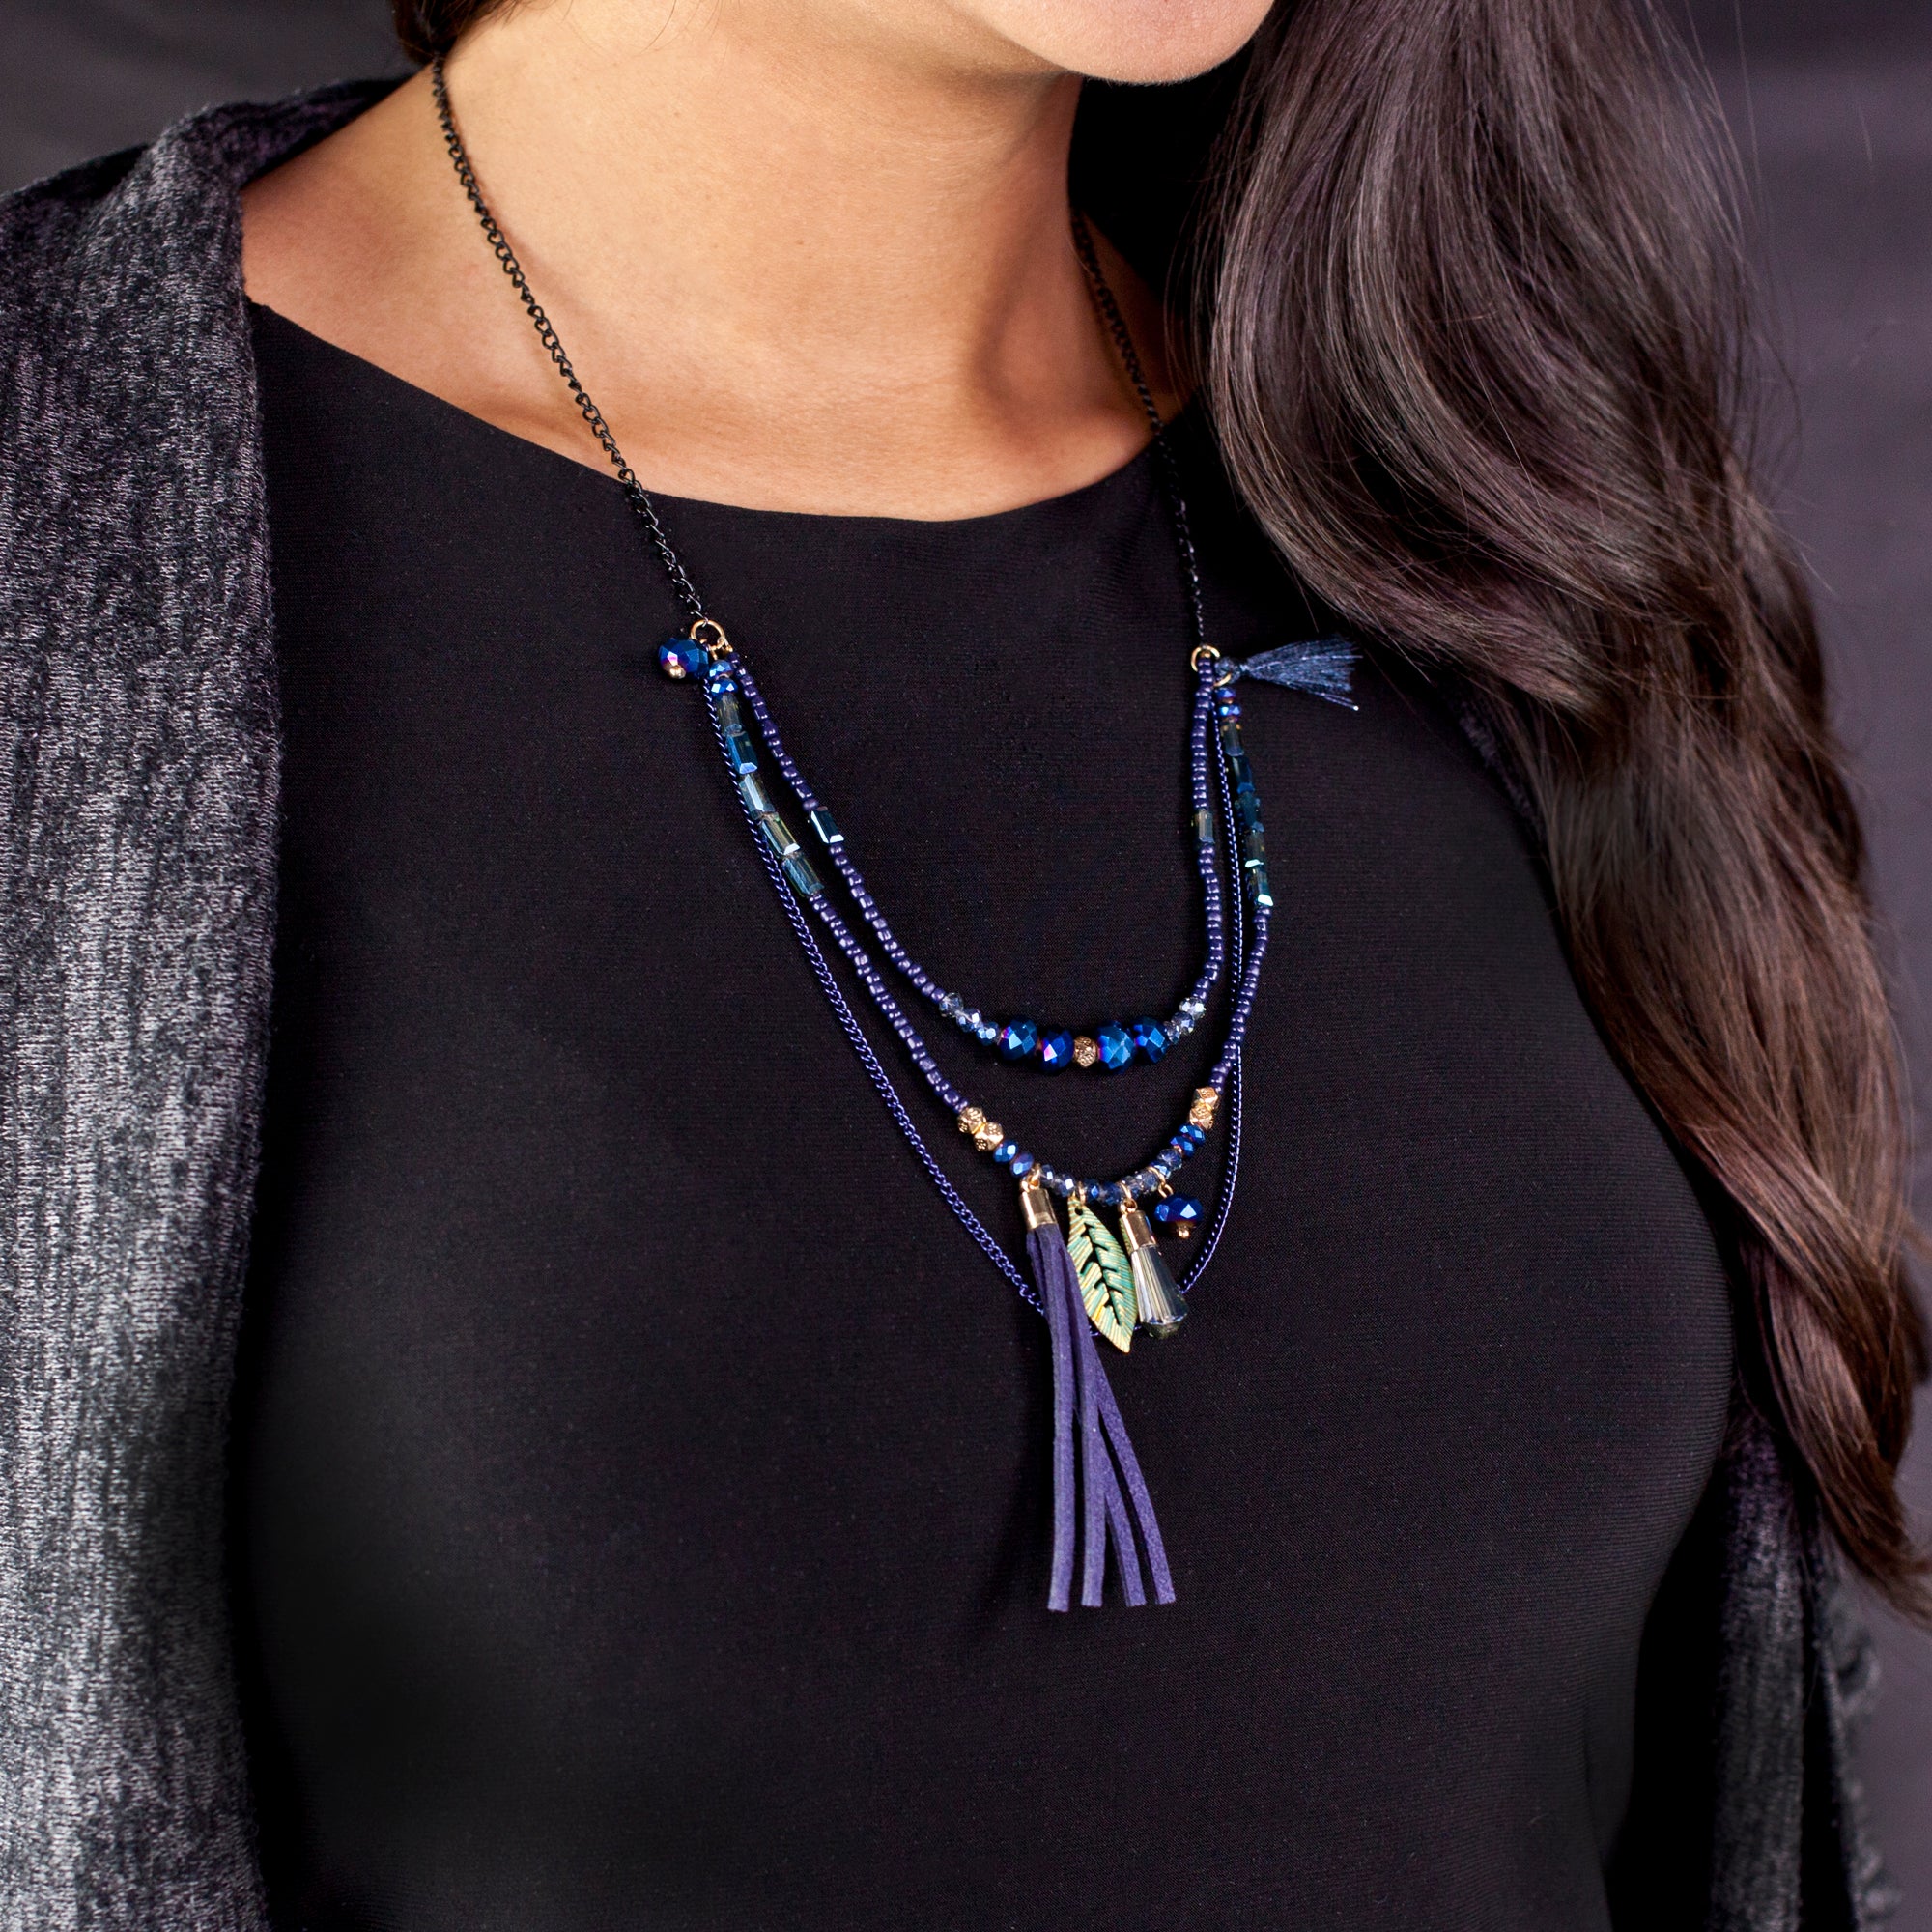 Handmade Totally Boho! Over a hundred of intricately hand strung beads Faceted crystal Black Chain Faux Leather, and raffia tassel Gold Lobster Claw clasp Adjustable length 12”-14, 30.48cm.-35.56cm to bottom of tassel